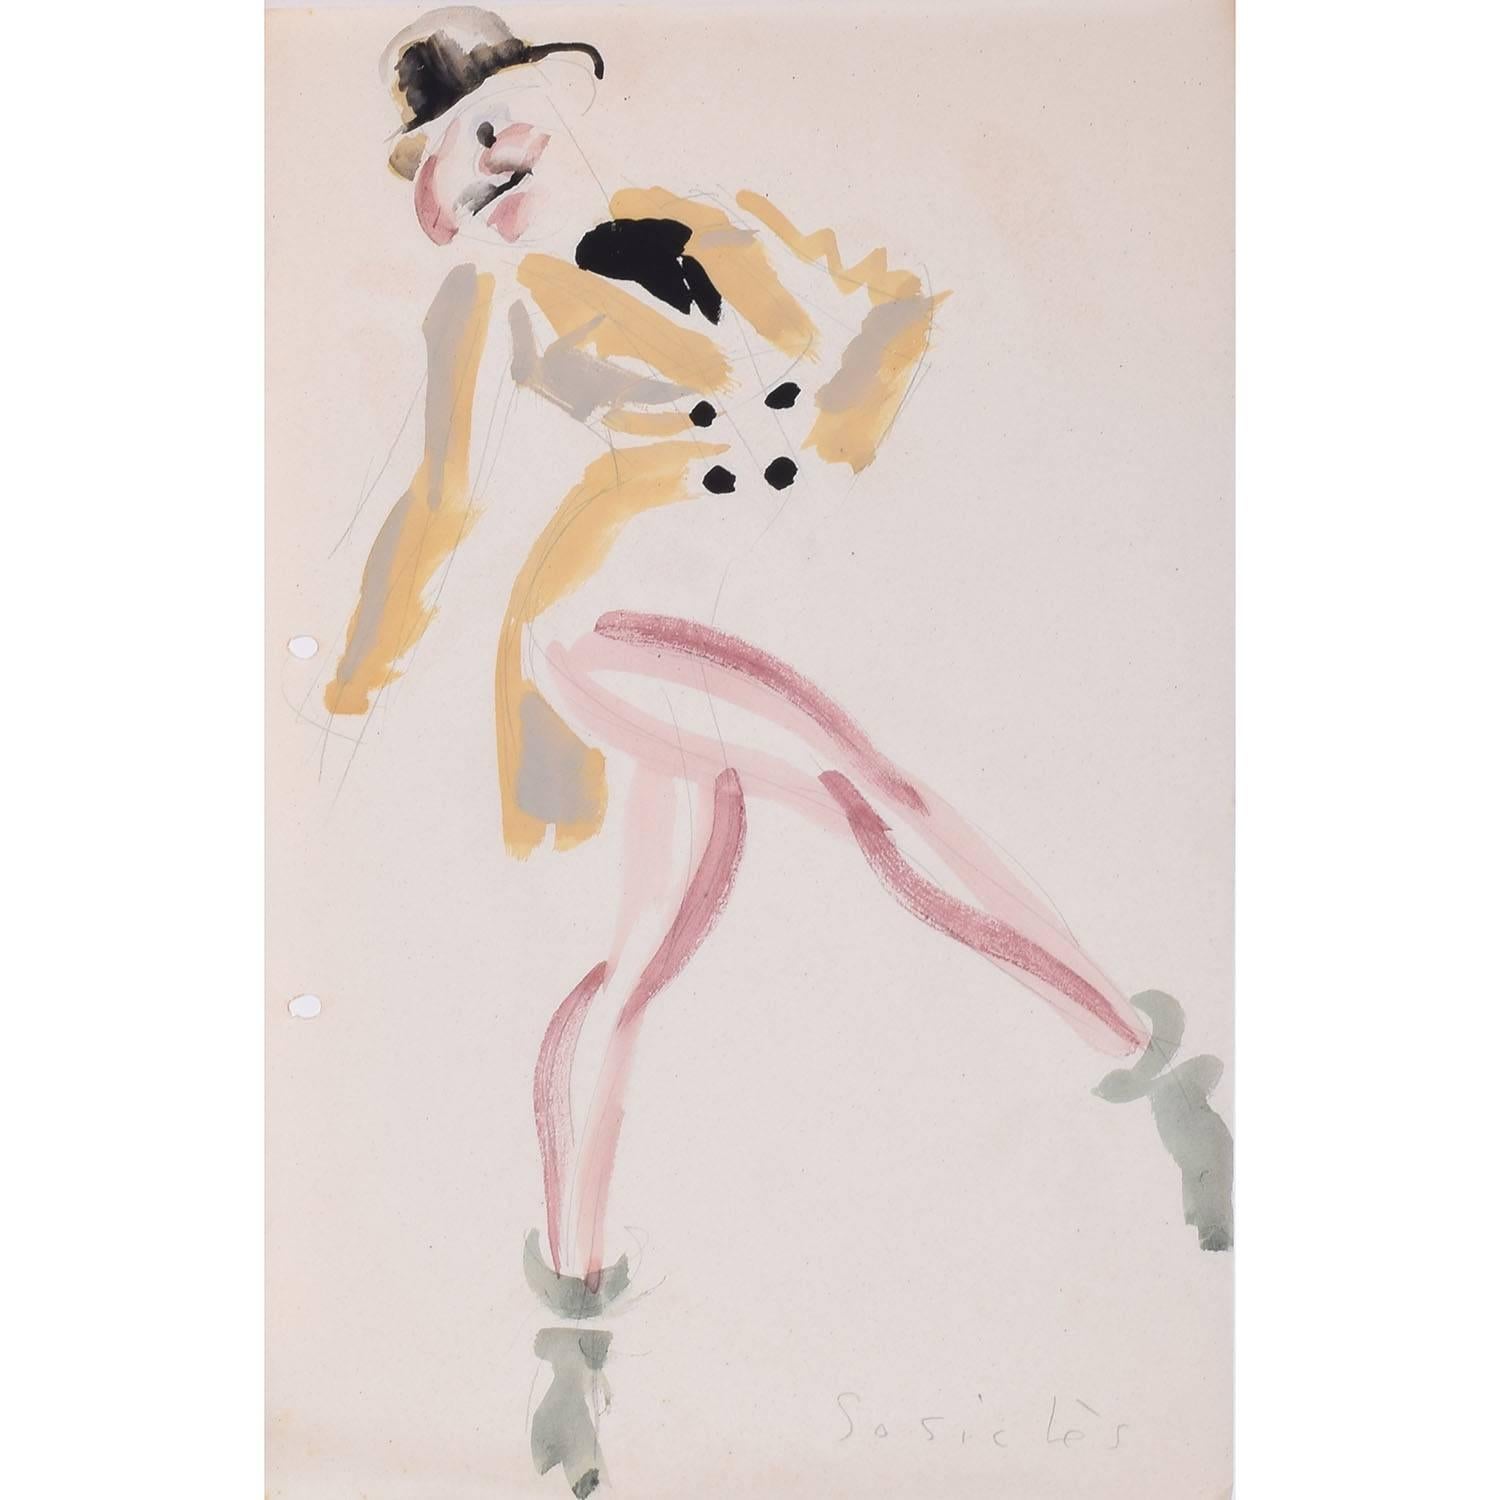 We acquired a series of paintings and posters from Clifford and Rosemary Ellis's studio. To find more scroll down to "More from this Seller" and below it click on "See all from this Seller." 

Clifford Ellis (1907-1985)
Sosicles I (1934)
Theatrical